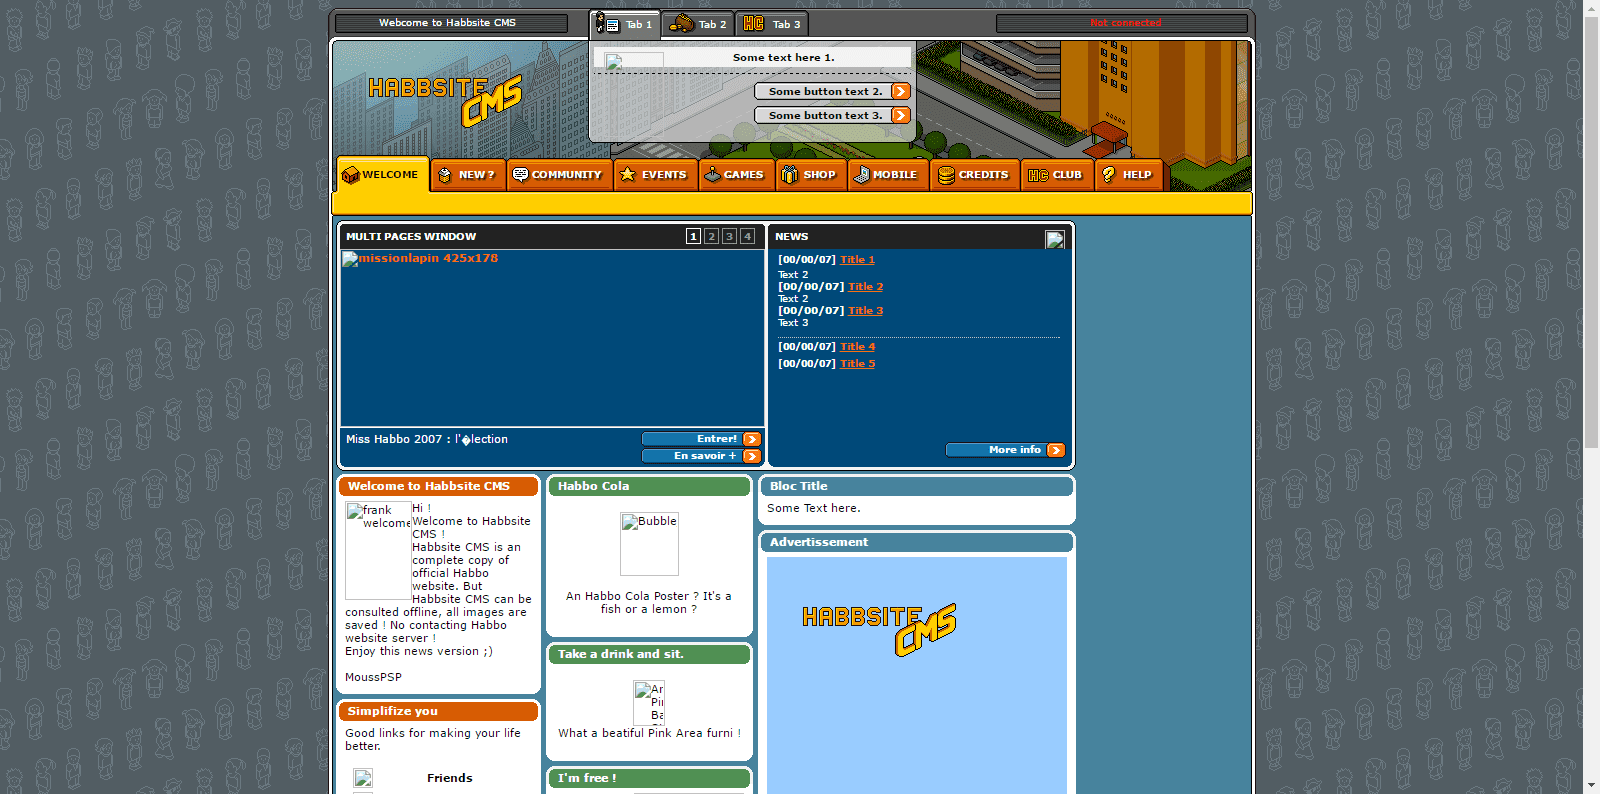 qFhKVMz - Habbo History Archive Site (Send me Anything Useful) - RaGEZONE Forums